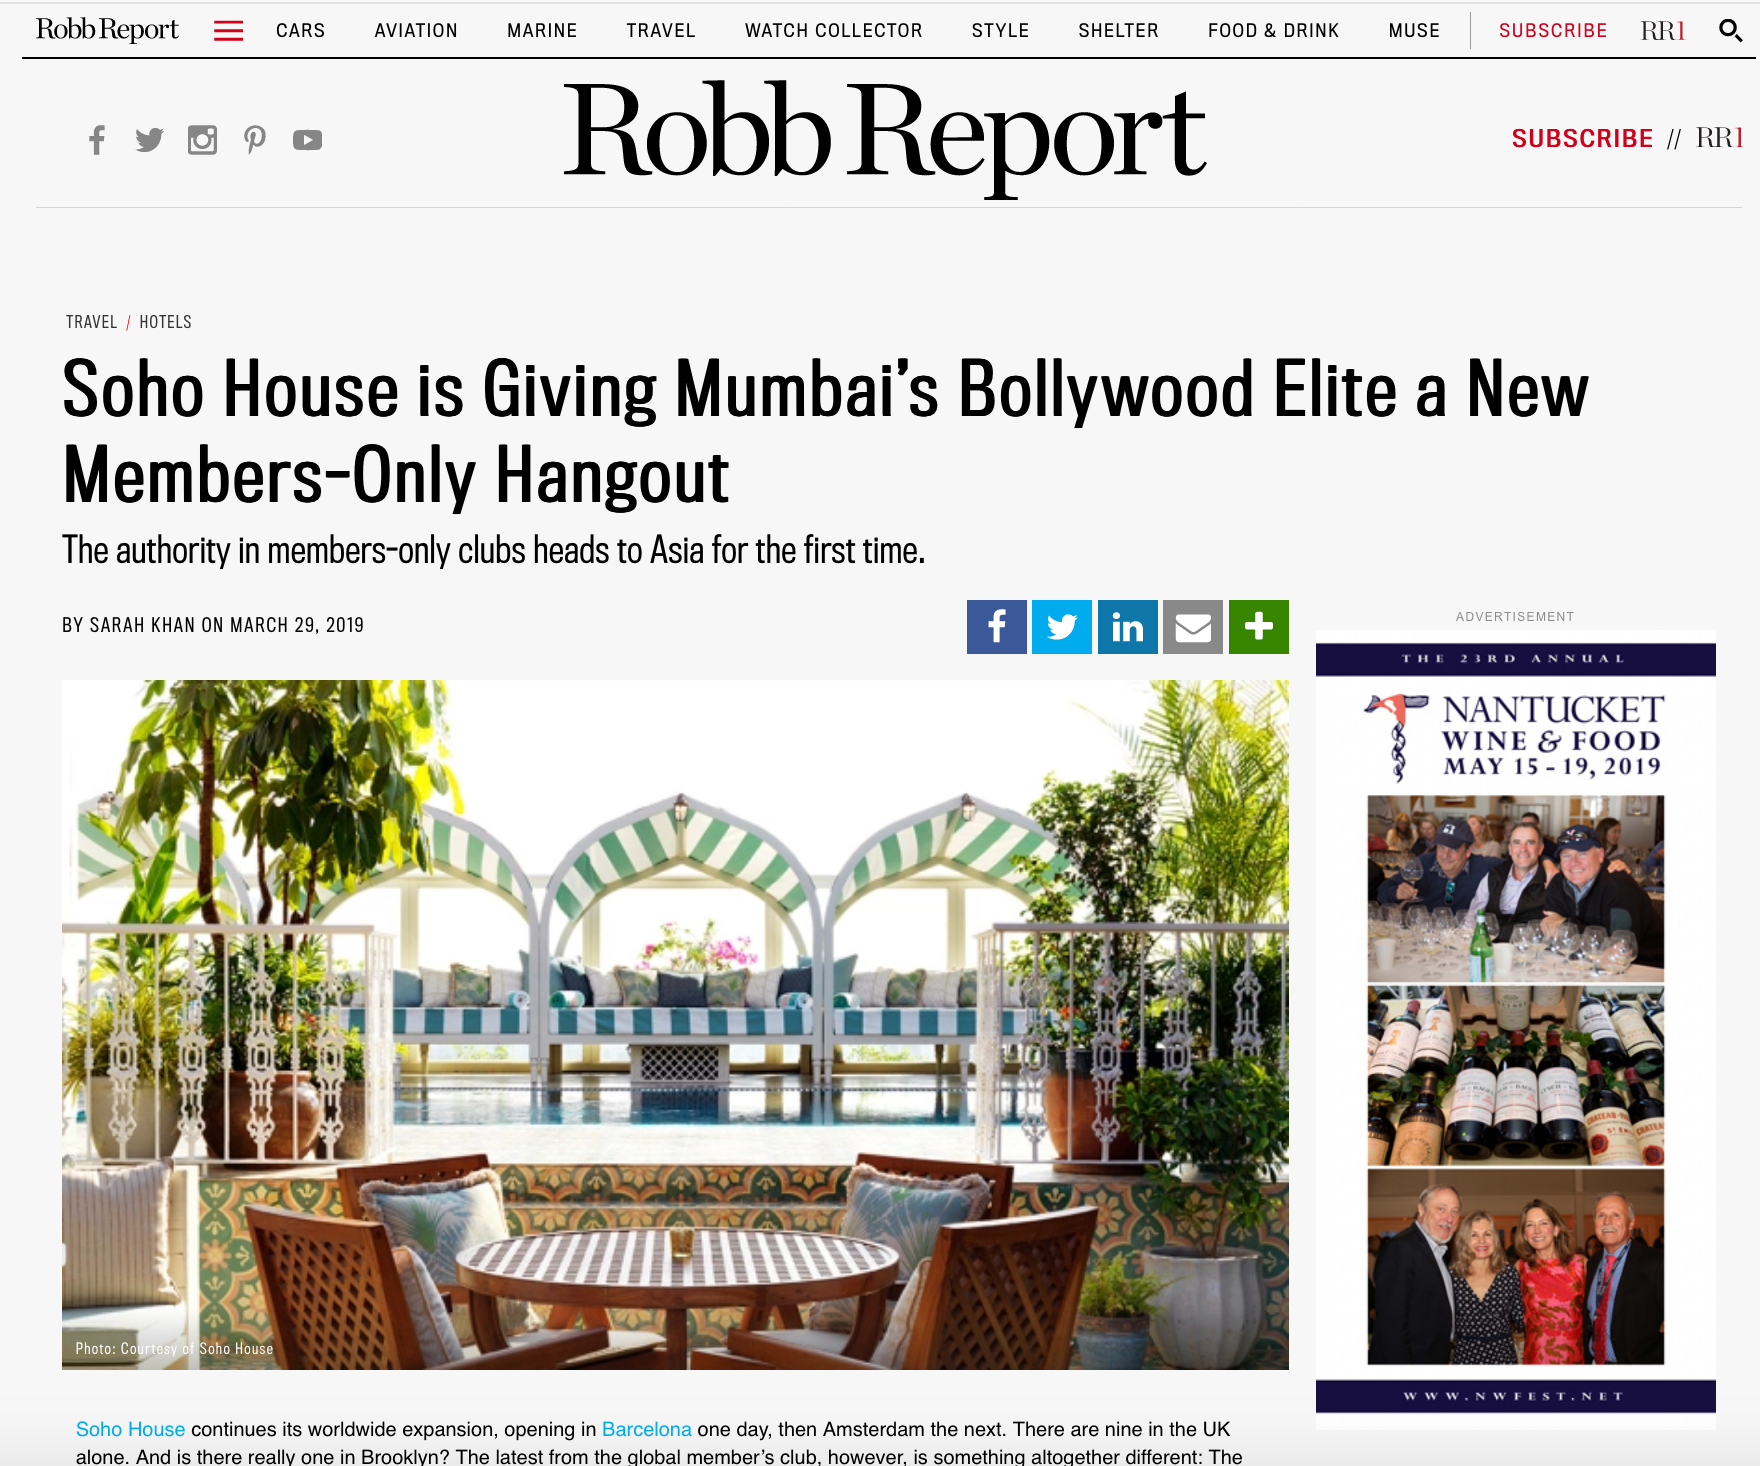 Robb Report: Soho House is Giving Mumbaiâ€™s Bollywood Elite a New Members-Only Hangout